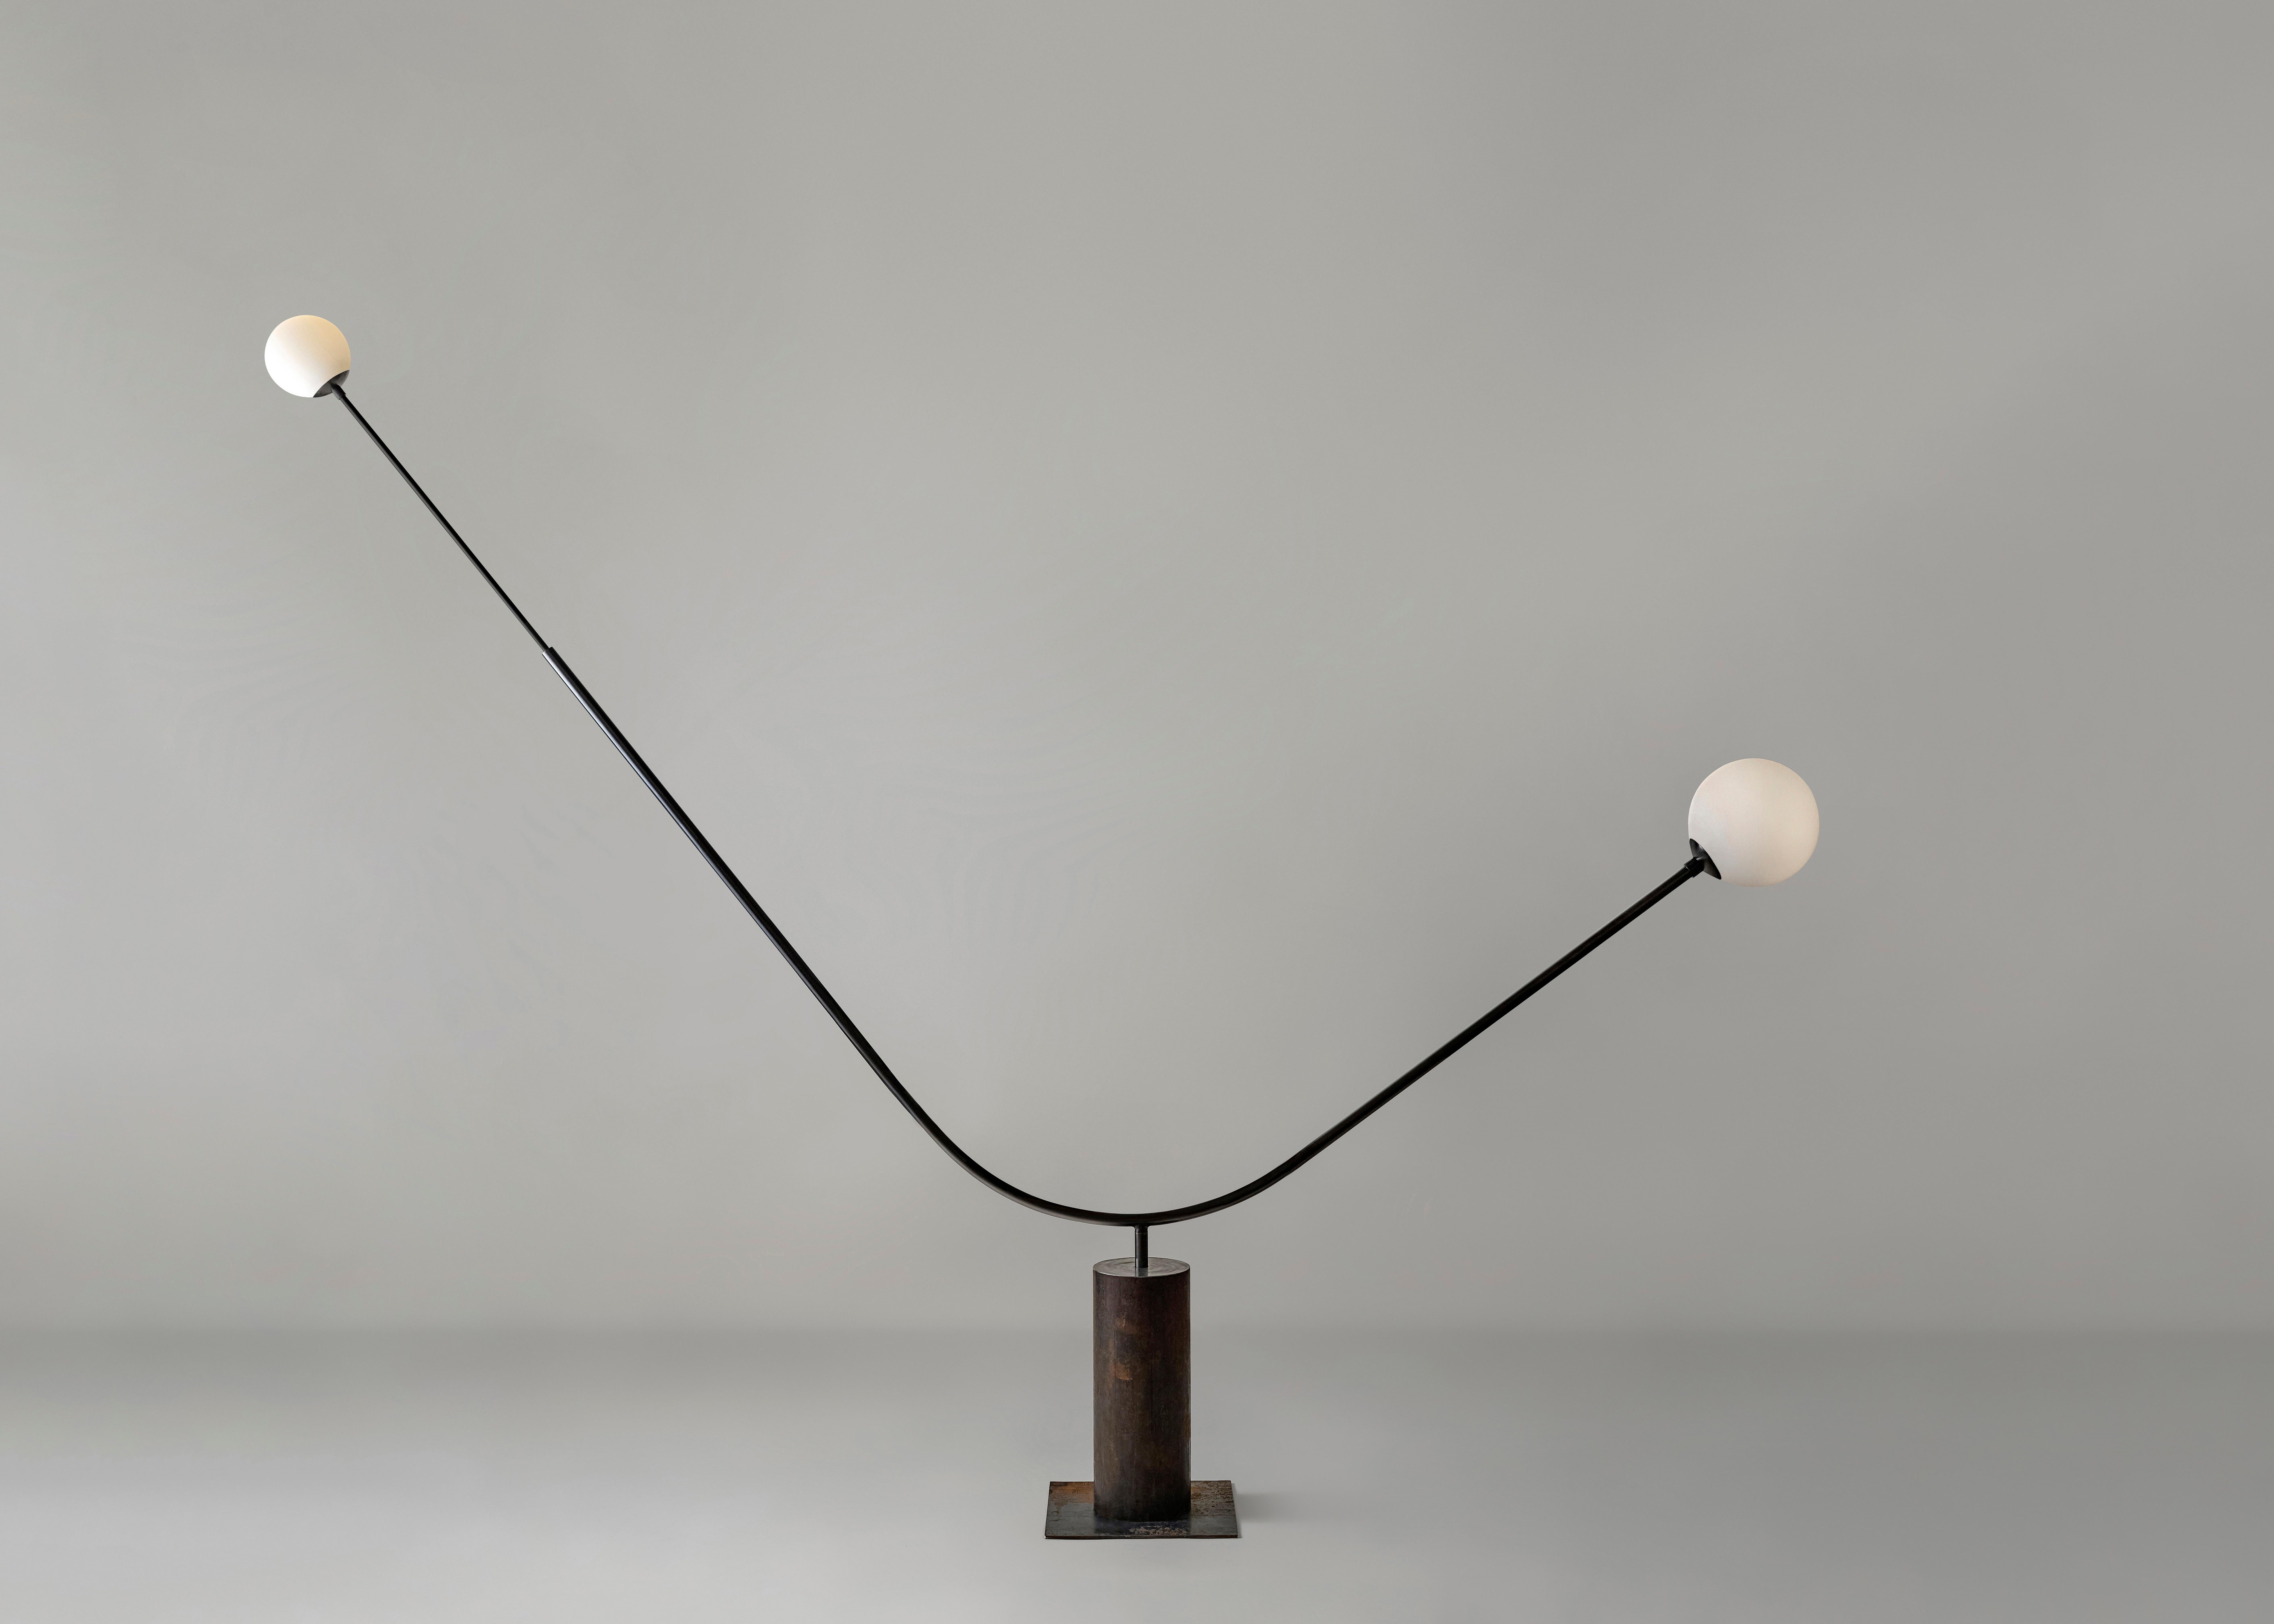 Envol floor lamp by Paul Matter.
Measures: H 260 x W 280 cm.
Materials: burnt brass, patineted iron, glass.

Paul Matter
Paul Matter is a contemporary light design studio that explores light design by blending the traditional with the